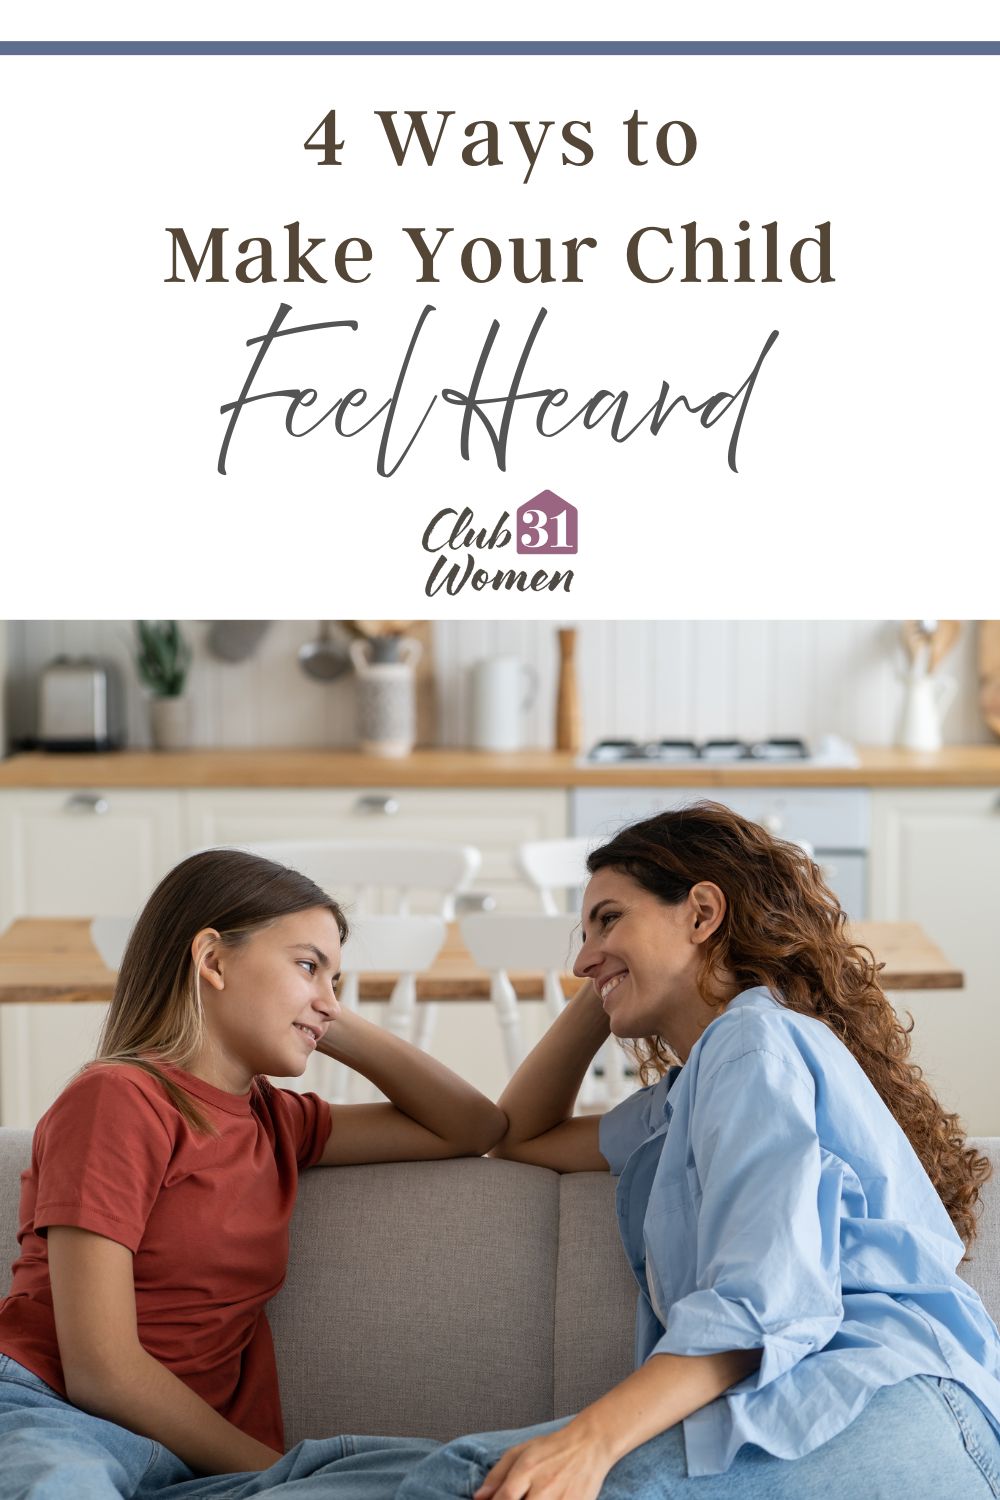 As parent, sometimes we don't realize how valuable our undivided attention is to our children. How can you make your child feel heard? via @Club31Women